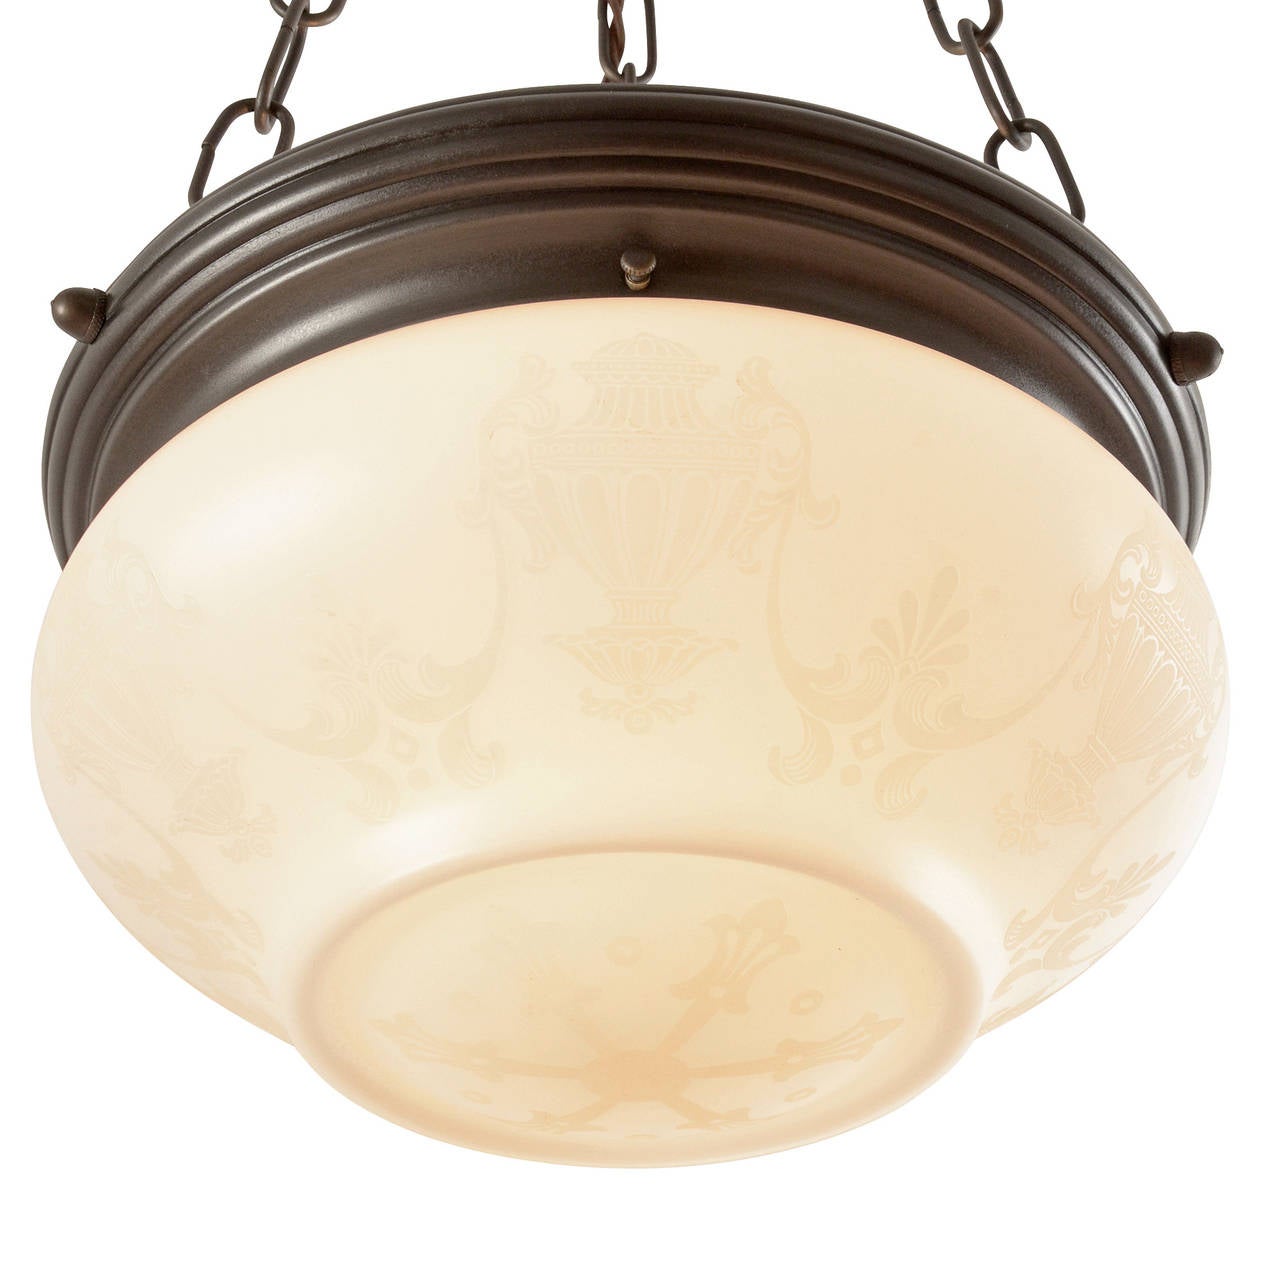 Semi-indirect bowl fixtures (some light diffused down, some light reflected up) were all the rage for dining rooms between 1910 and 1920, after which they slowly faded in popularity as pan fixtures ascended. This example dates to the later part of